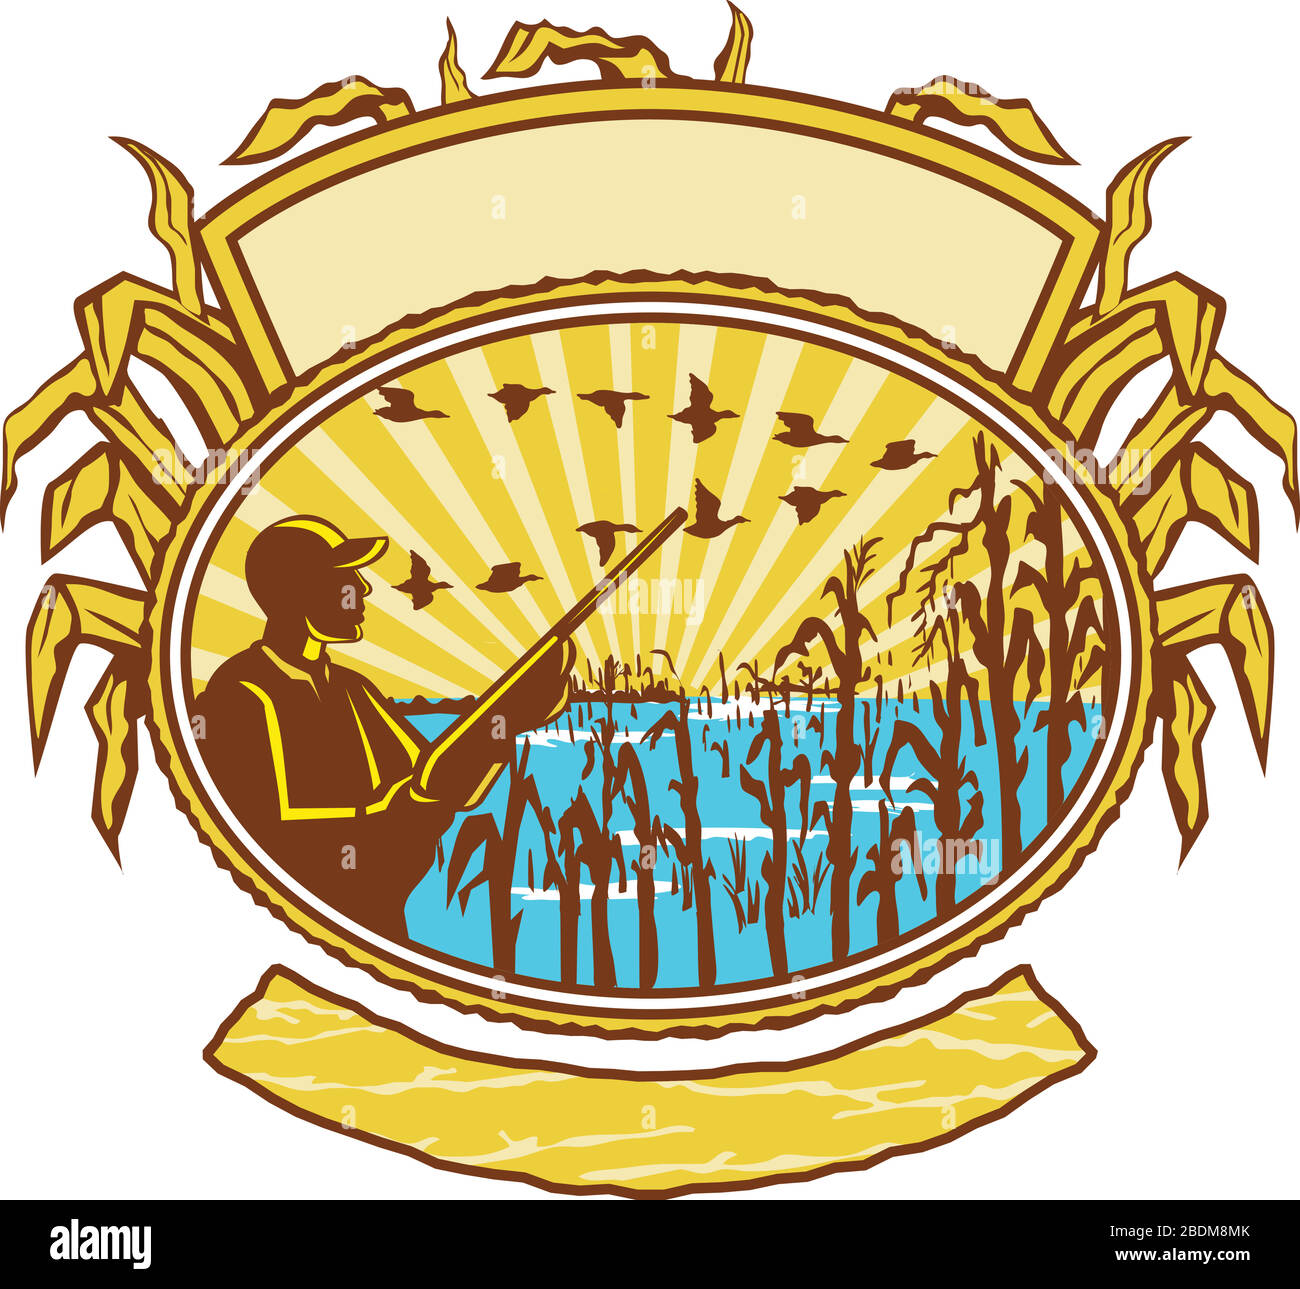 Retro style illustration of a bird or duck hunter with rifle in flooded cornfield with corn stalks set inside oval shape with banner and sunburst on i Stock Vector